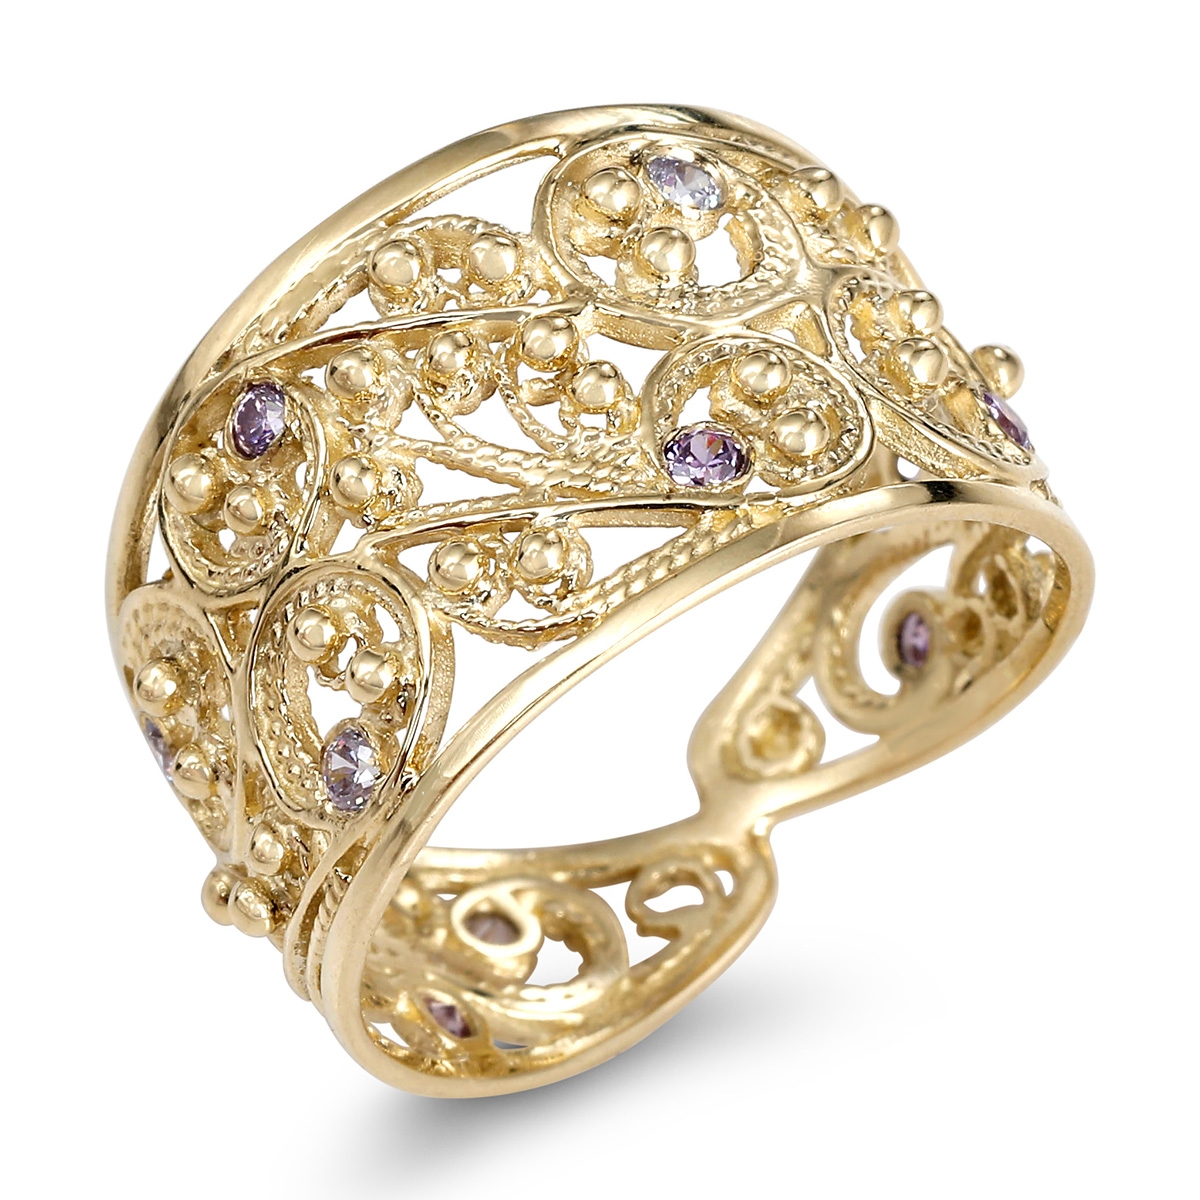 Rafael Jewelry Handcrafted 14K Yellow Gold Filigree Ring With Amethyst and Lavender Stones - 1